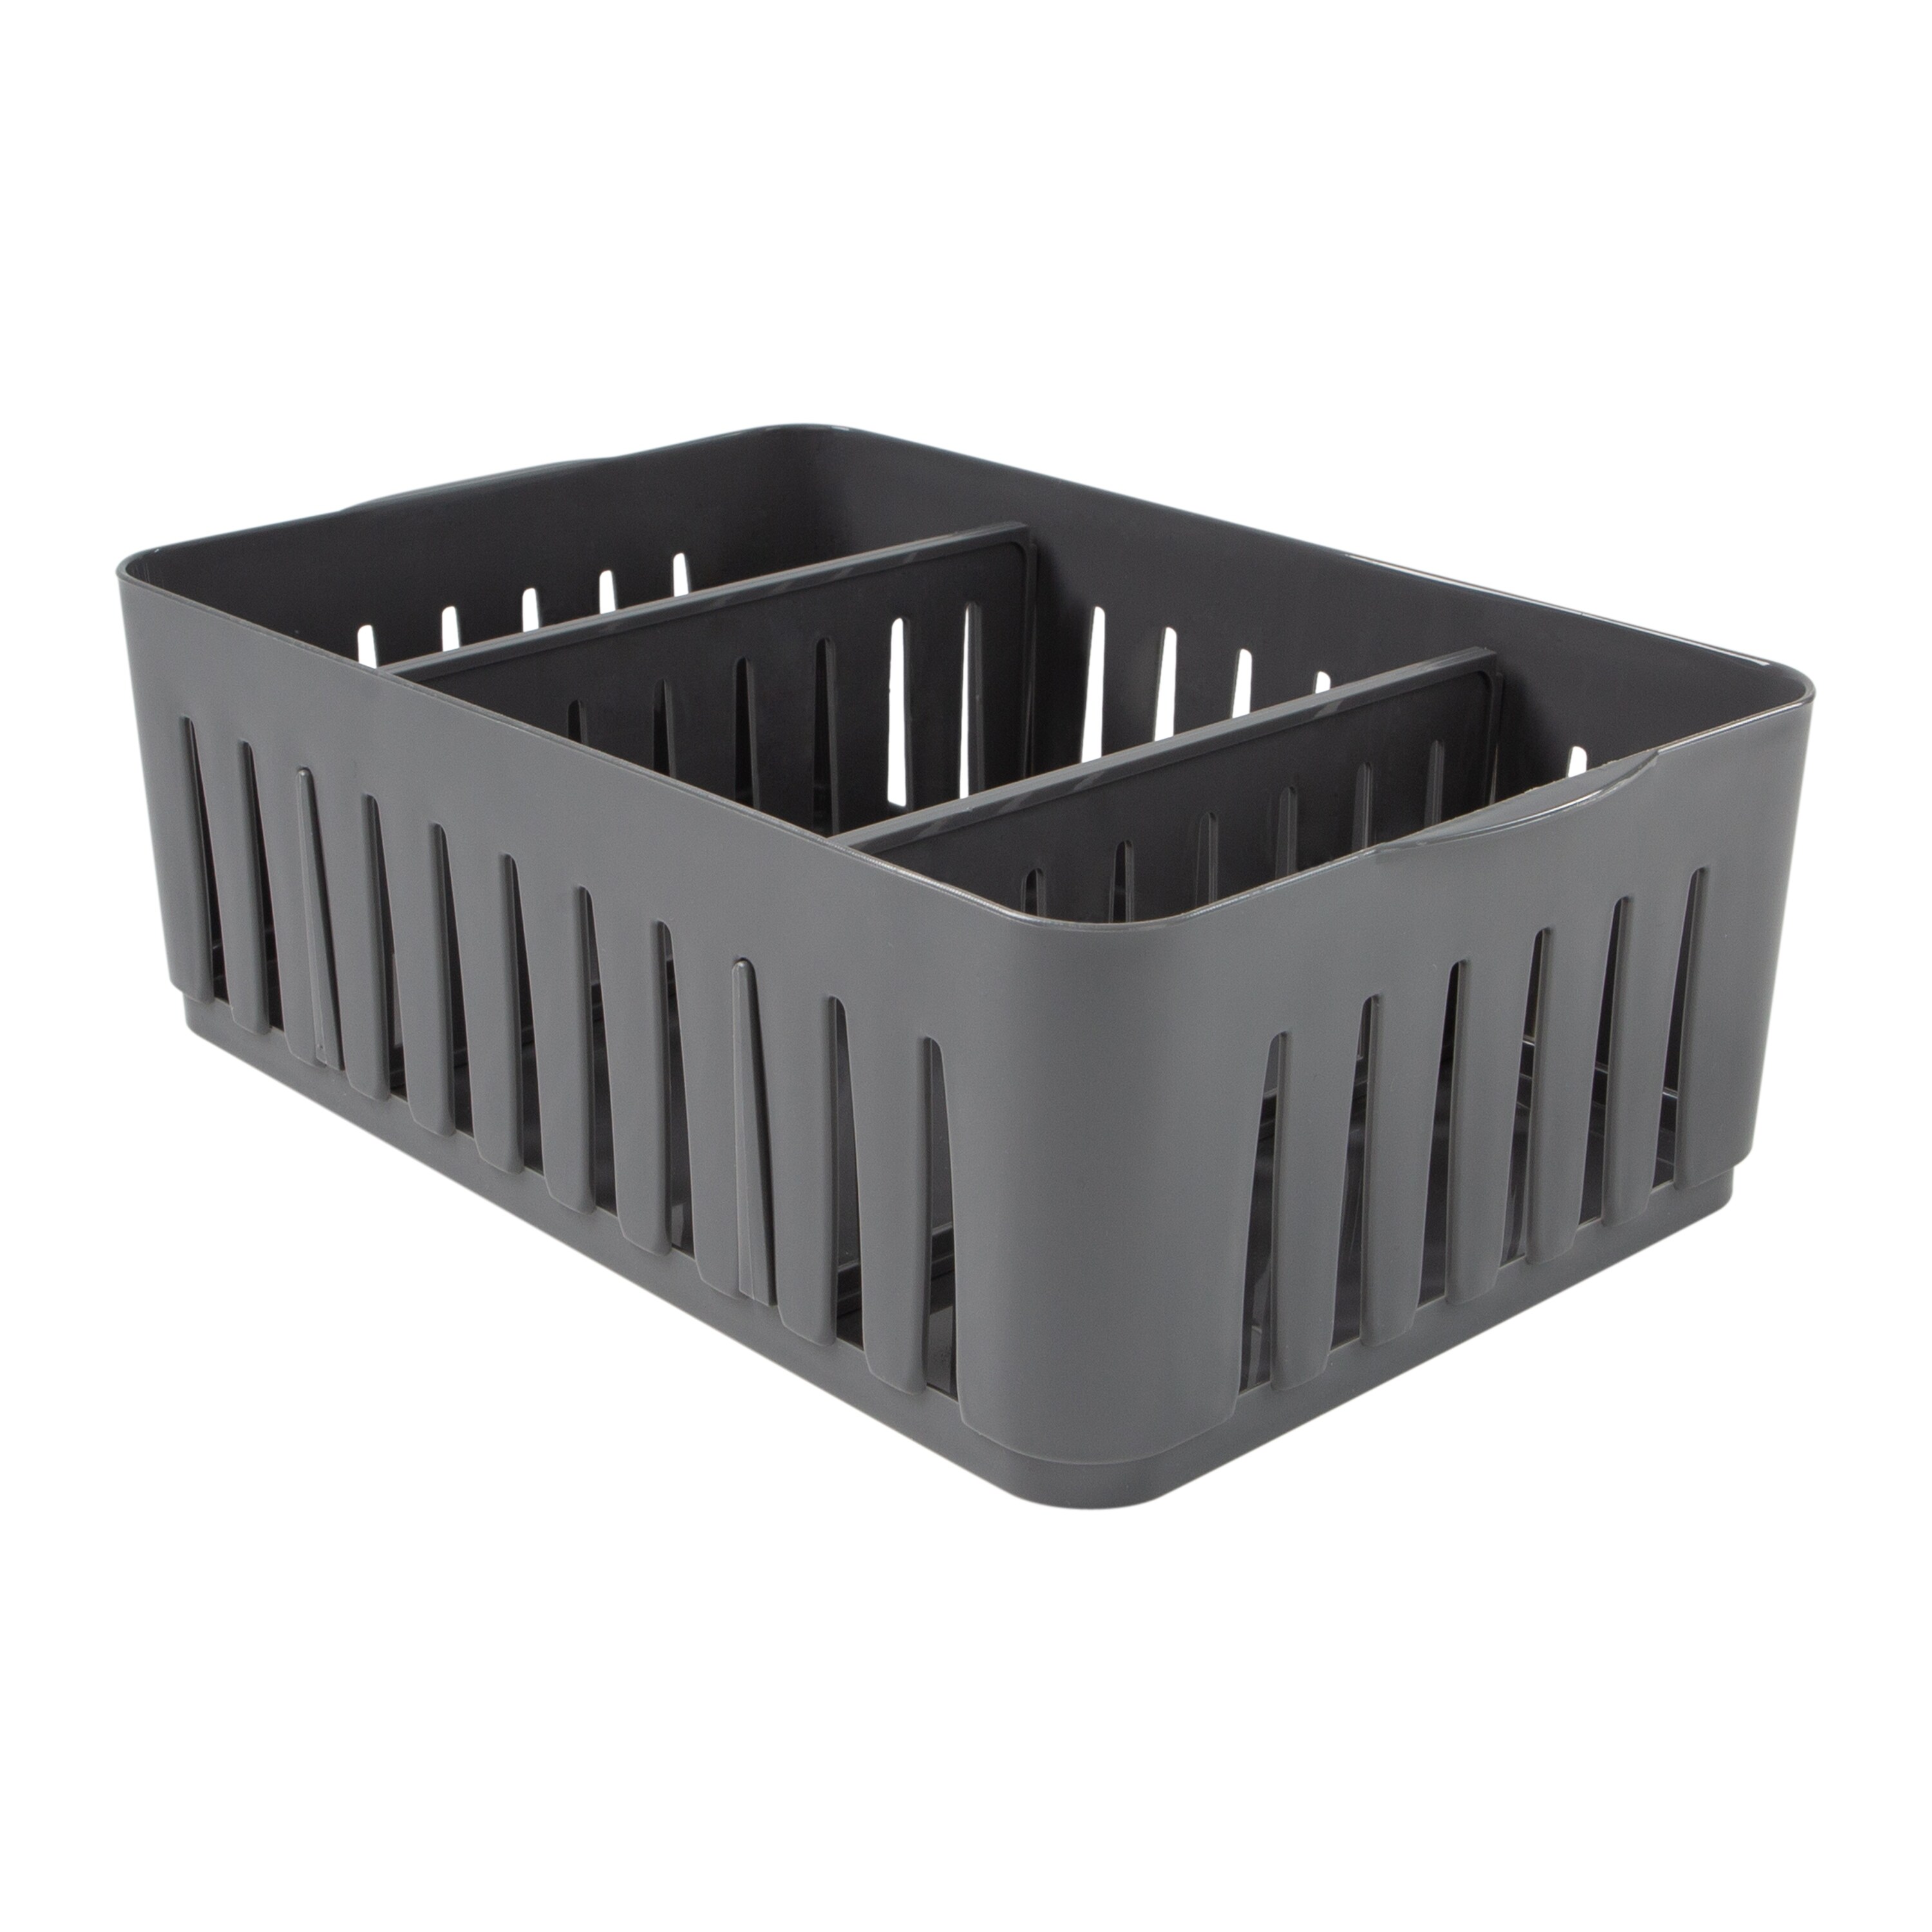 https://ak1.ostkcdn.com/images/products/is/images/direct/830516831afdf6544c5fcb2751b6b03cfbb20838/Simplify-2-Pack-Stackable-Organizer-Bin-with-Adjustable-Dividers-in-Grey.jpg